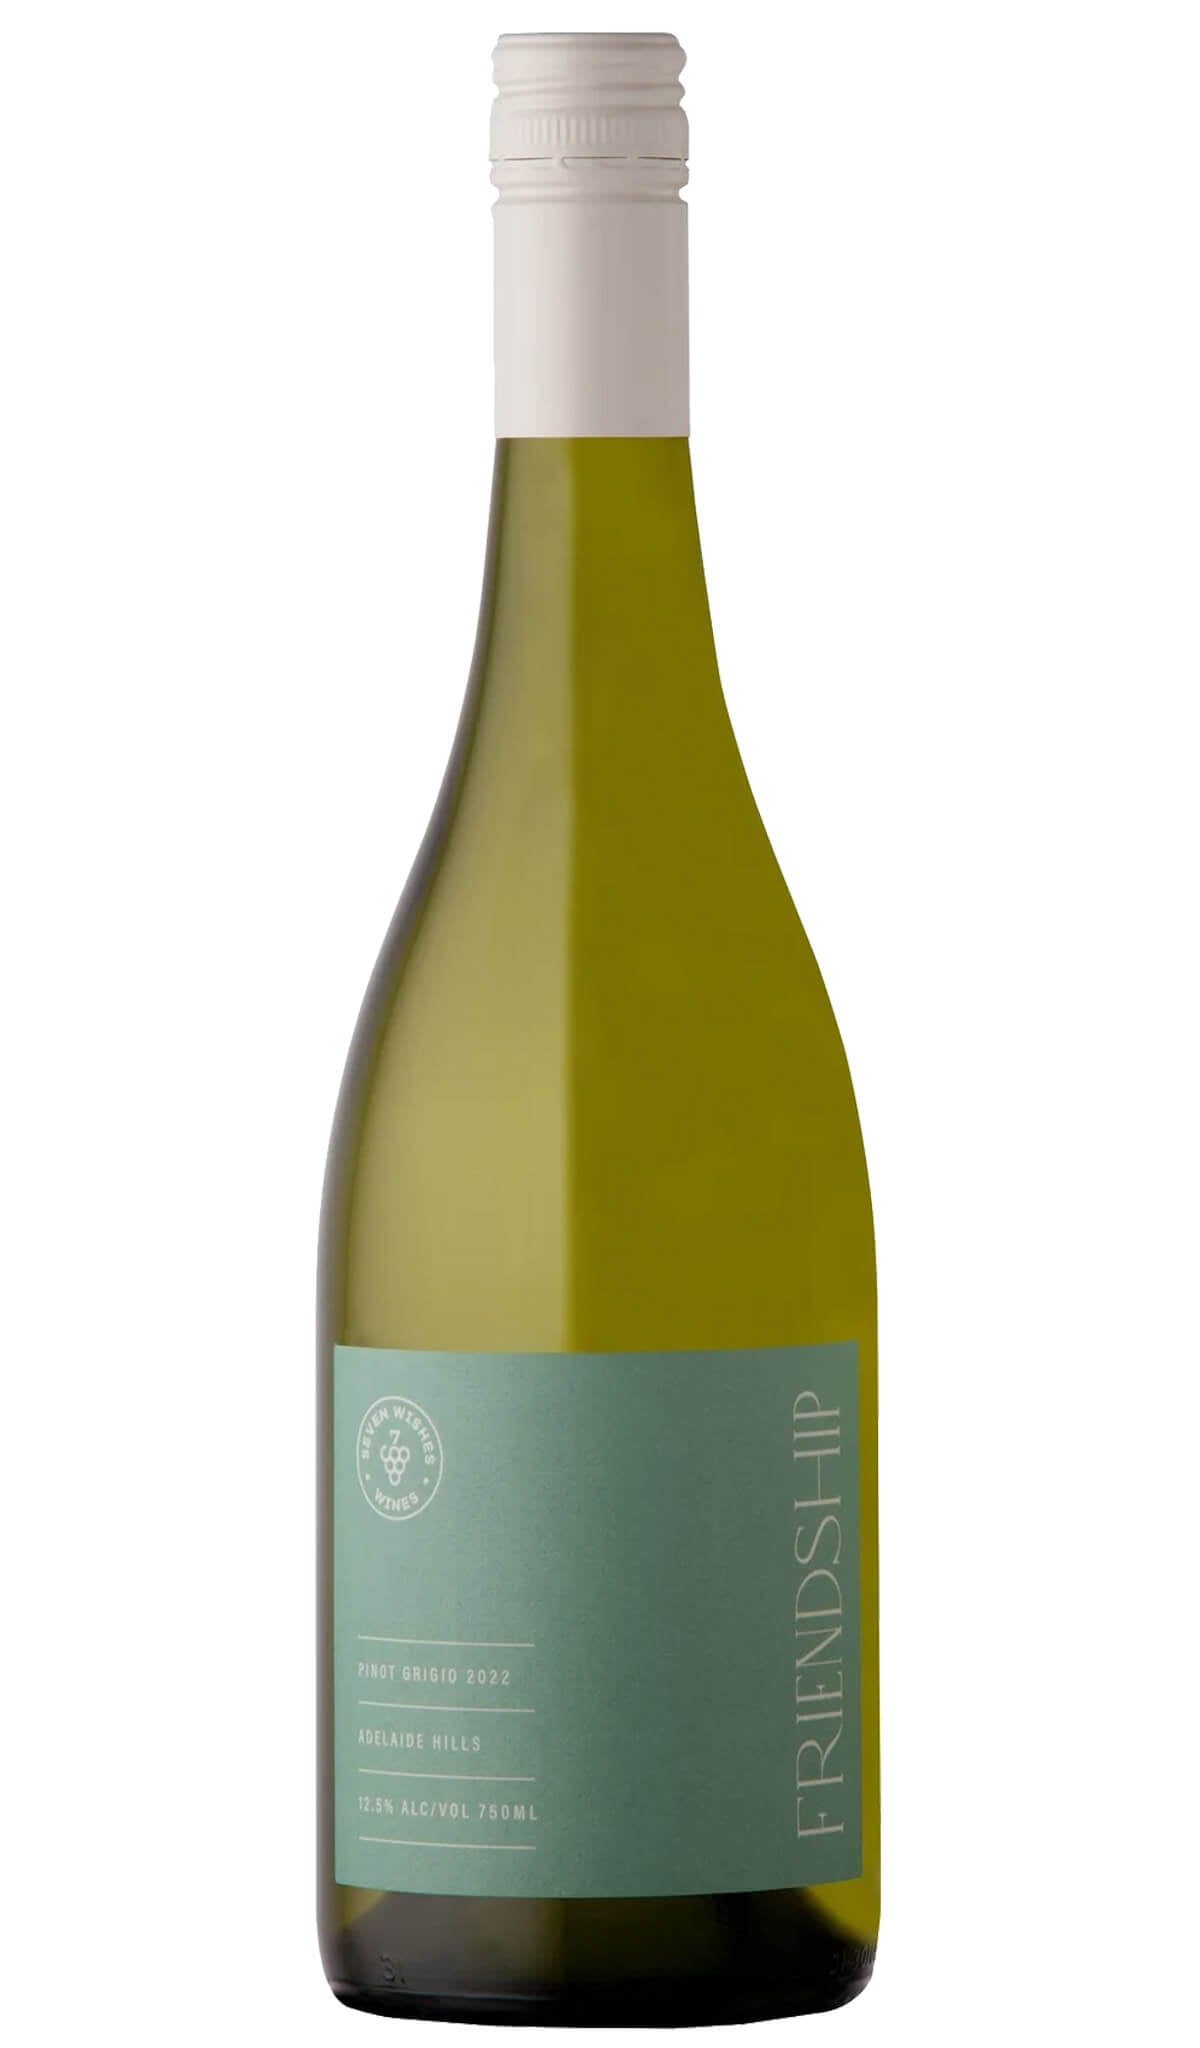 Find out more, explore the range and buy Five Geese 7 Wishes Friendship Pinot Grigio 2022 (Adelaide Hills) available online at Wine Sellers Direct - Australia's independent liquor specialists.